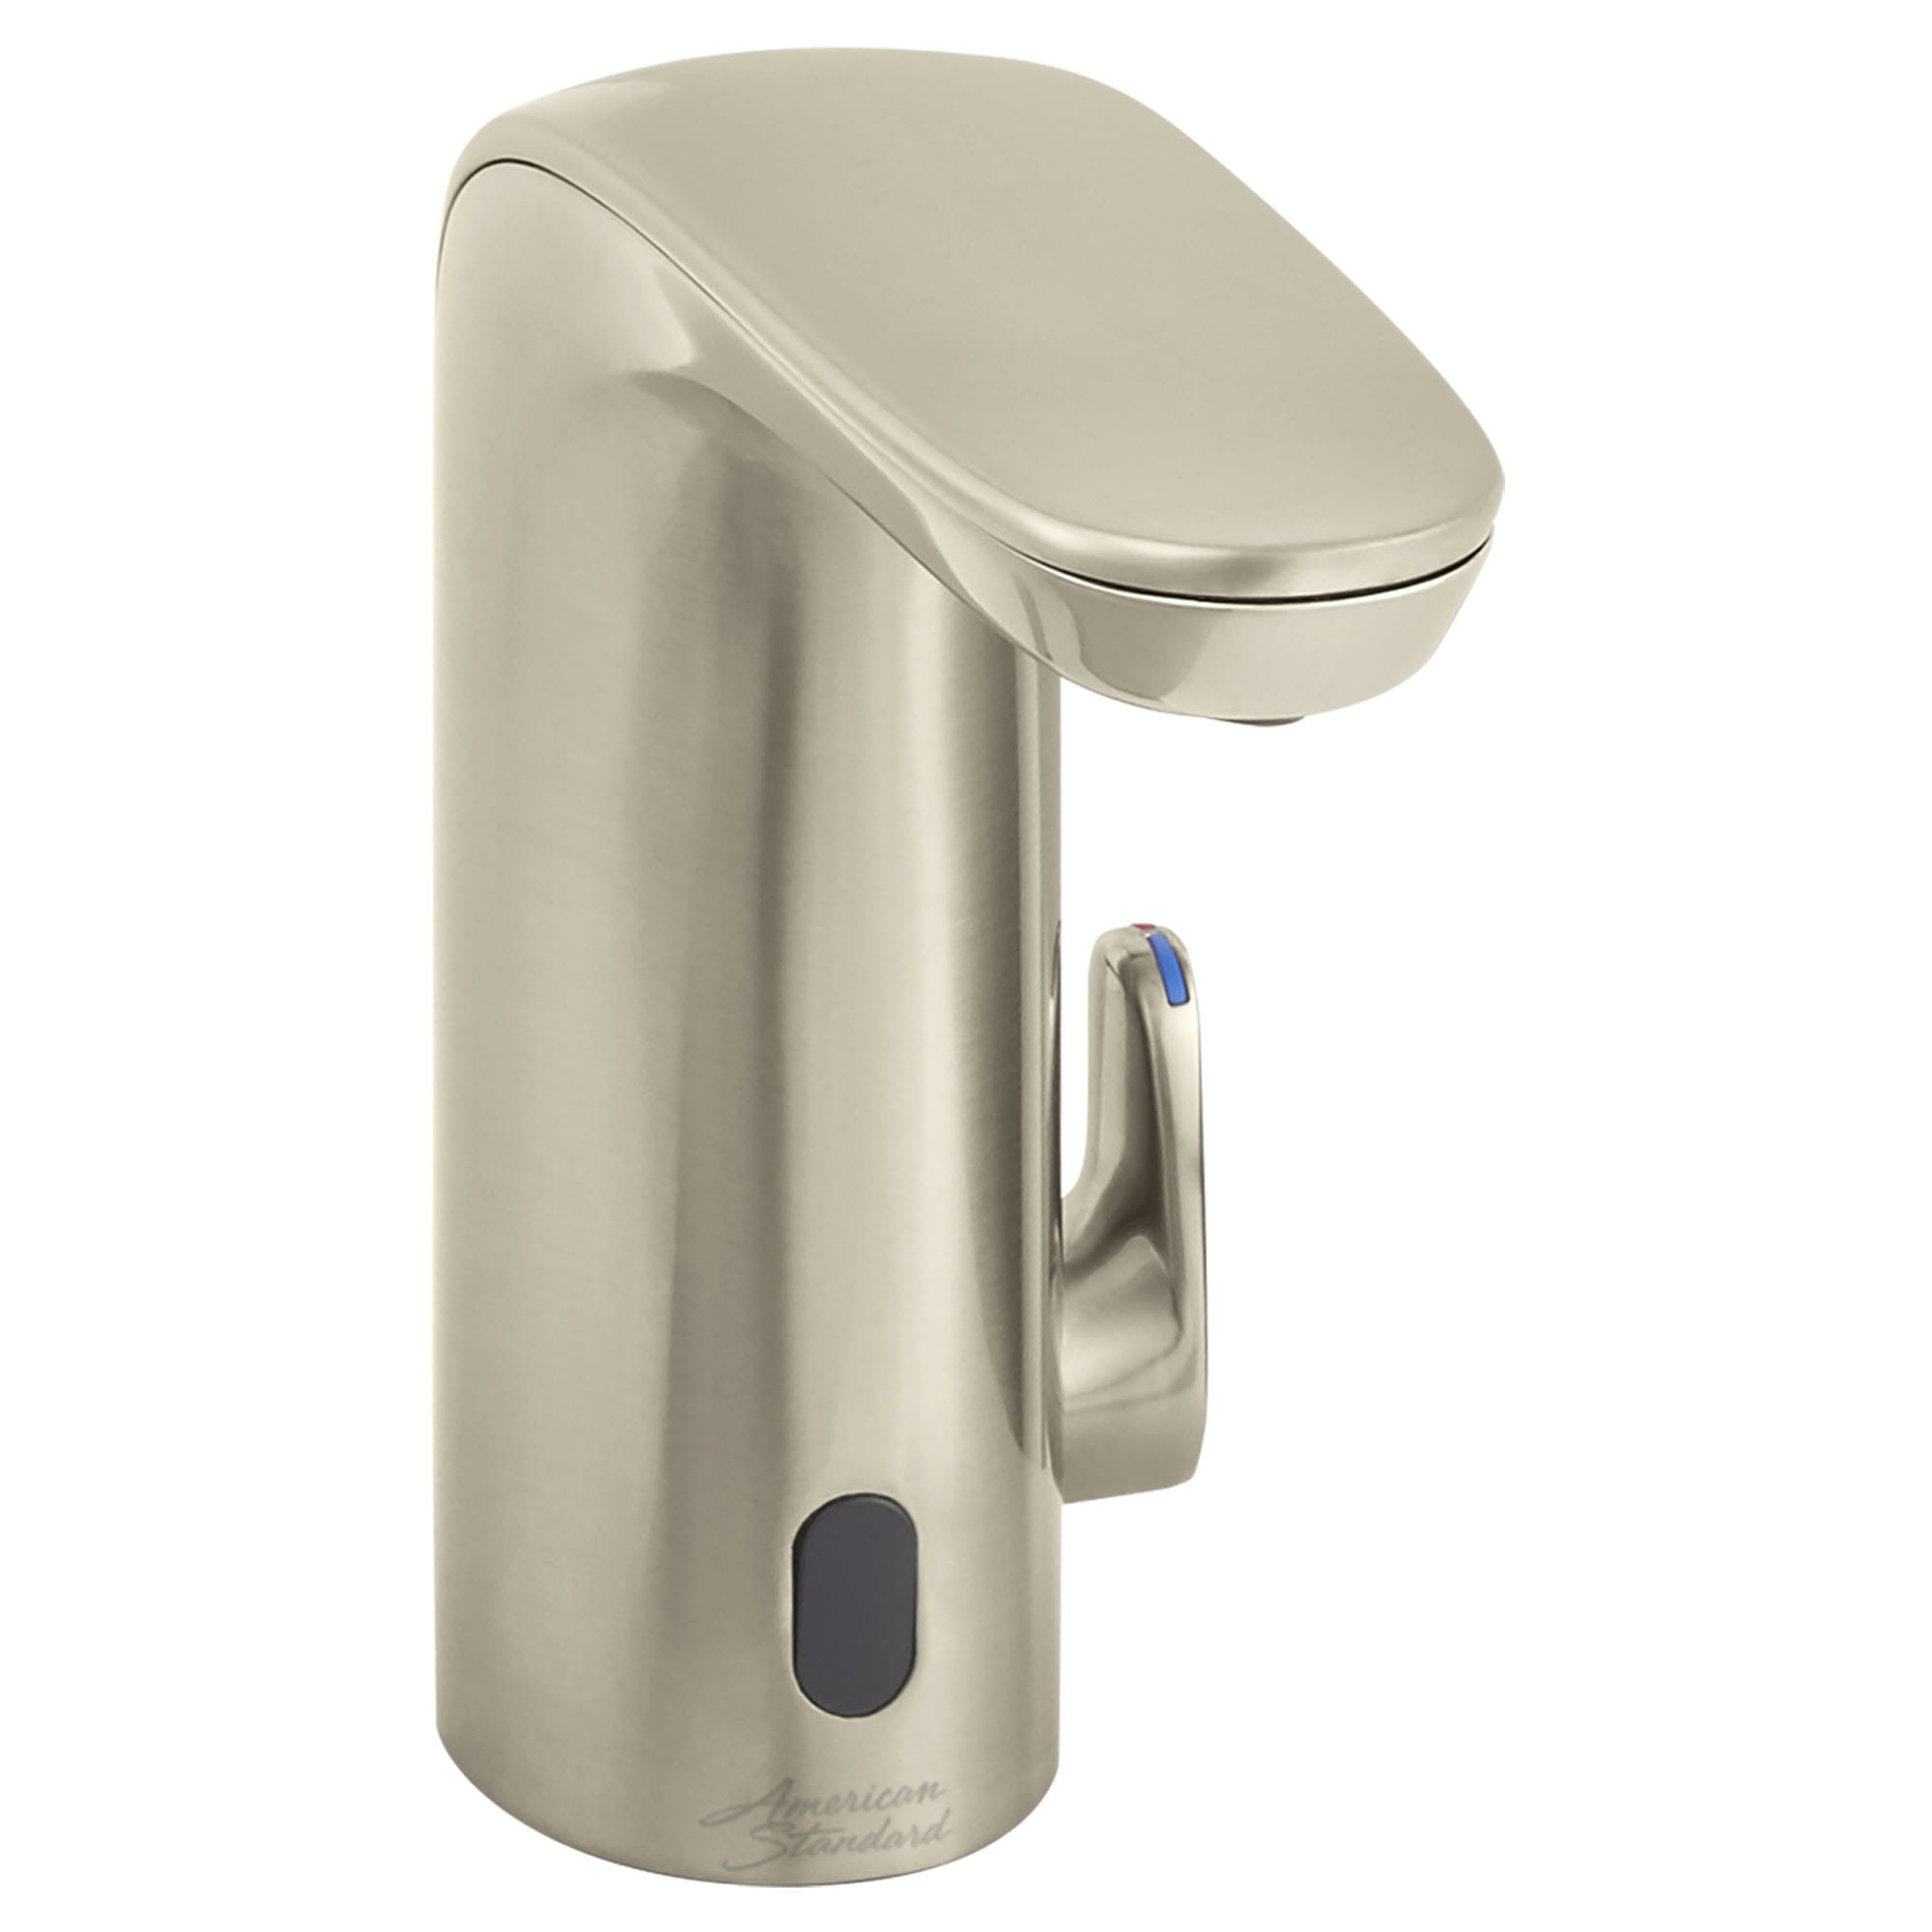 NextGen Selectronic Touchless Faucet Battery Powered With SmarTherm Safety Shut Off  Plus  ADM 15 gpm 57 Lpm   BRUSHED NICKEL